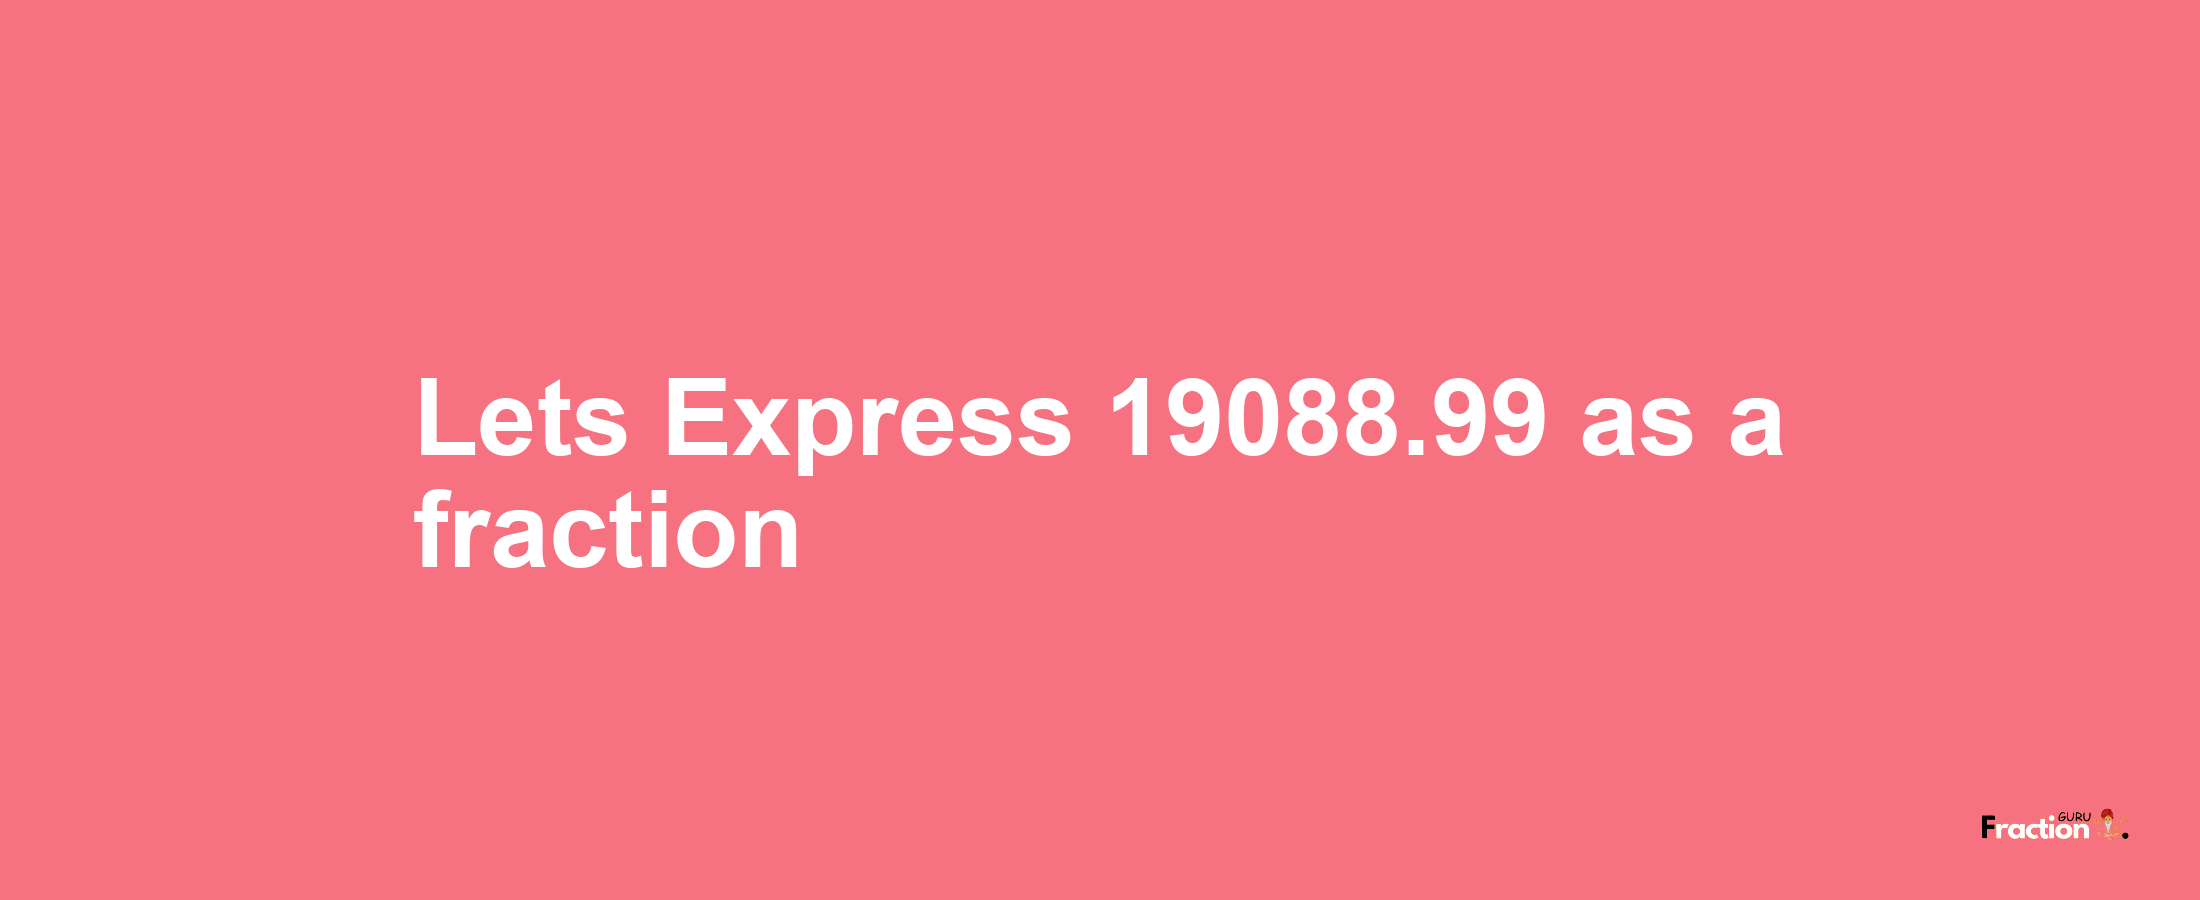 Lets Express 19088.99 as afraction